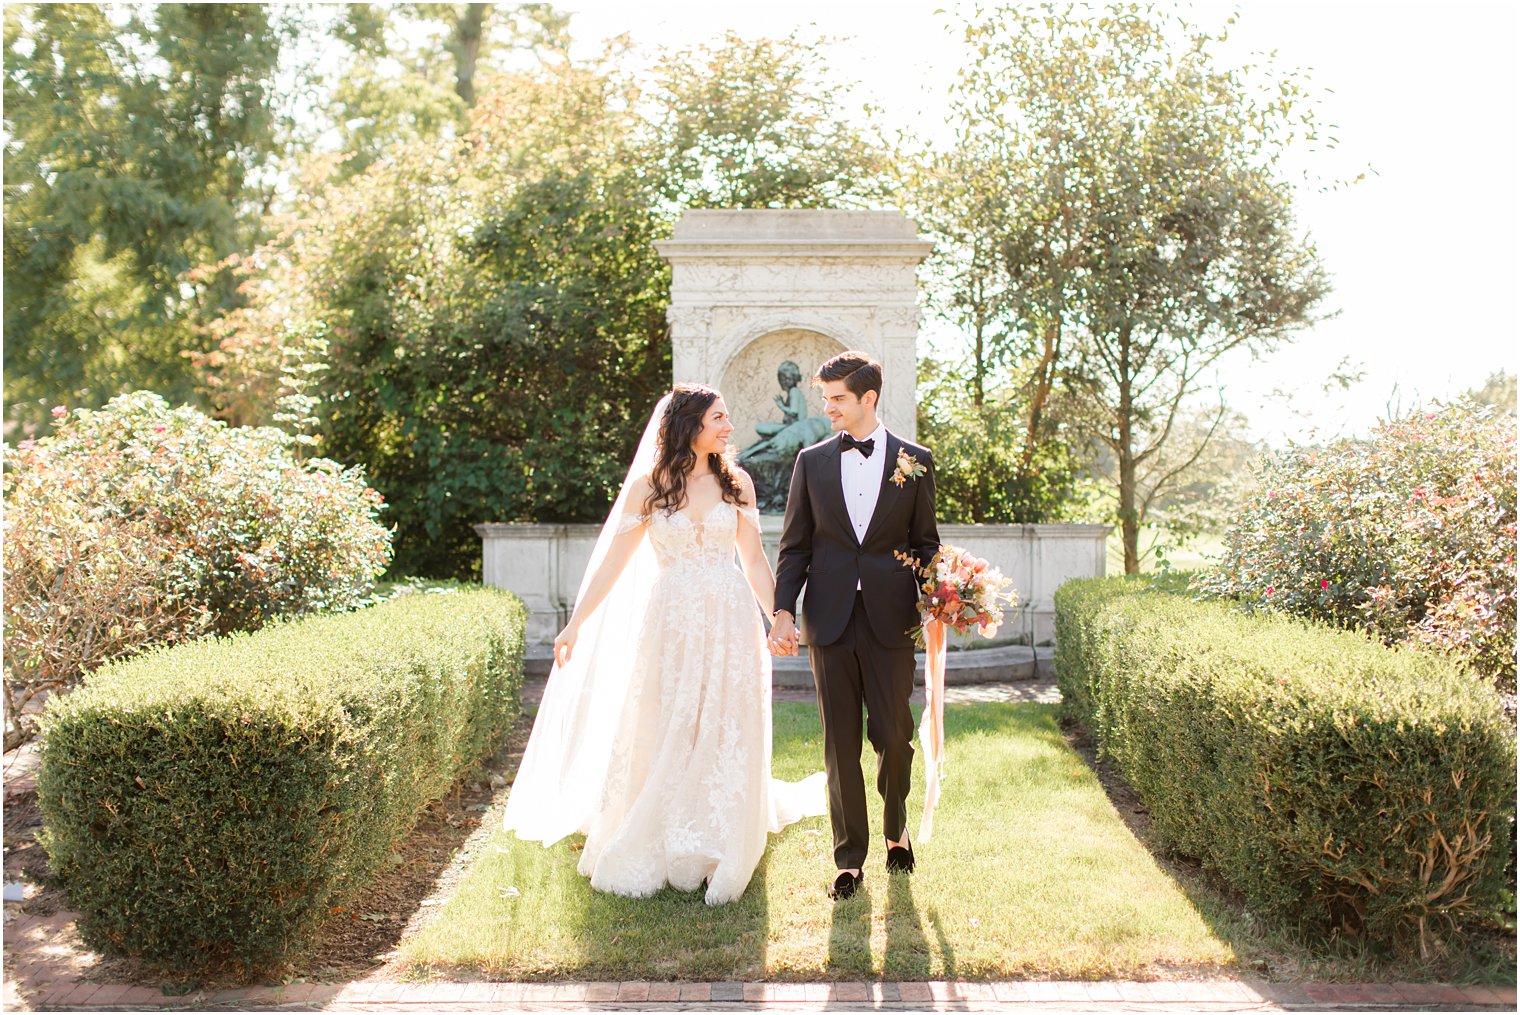 newlyweds walk through gardens at the Village Club of Sands Point